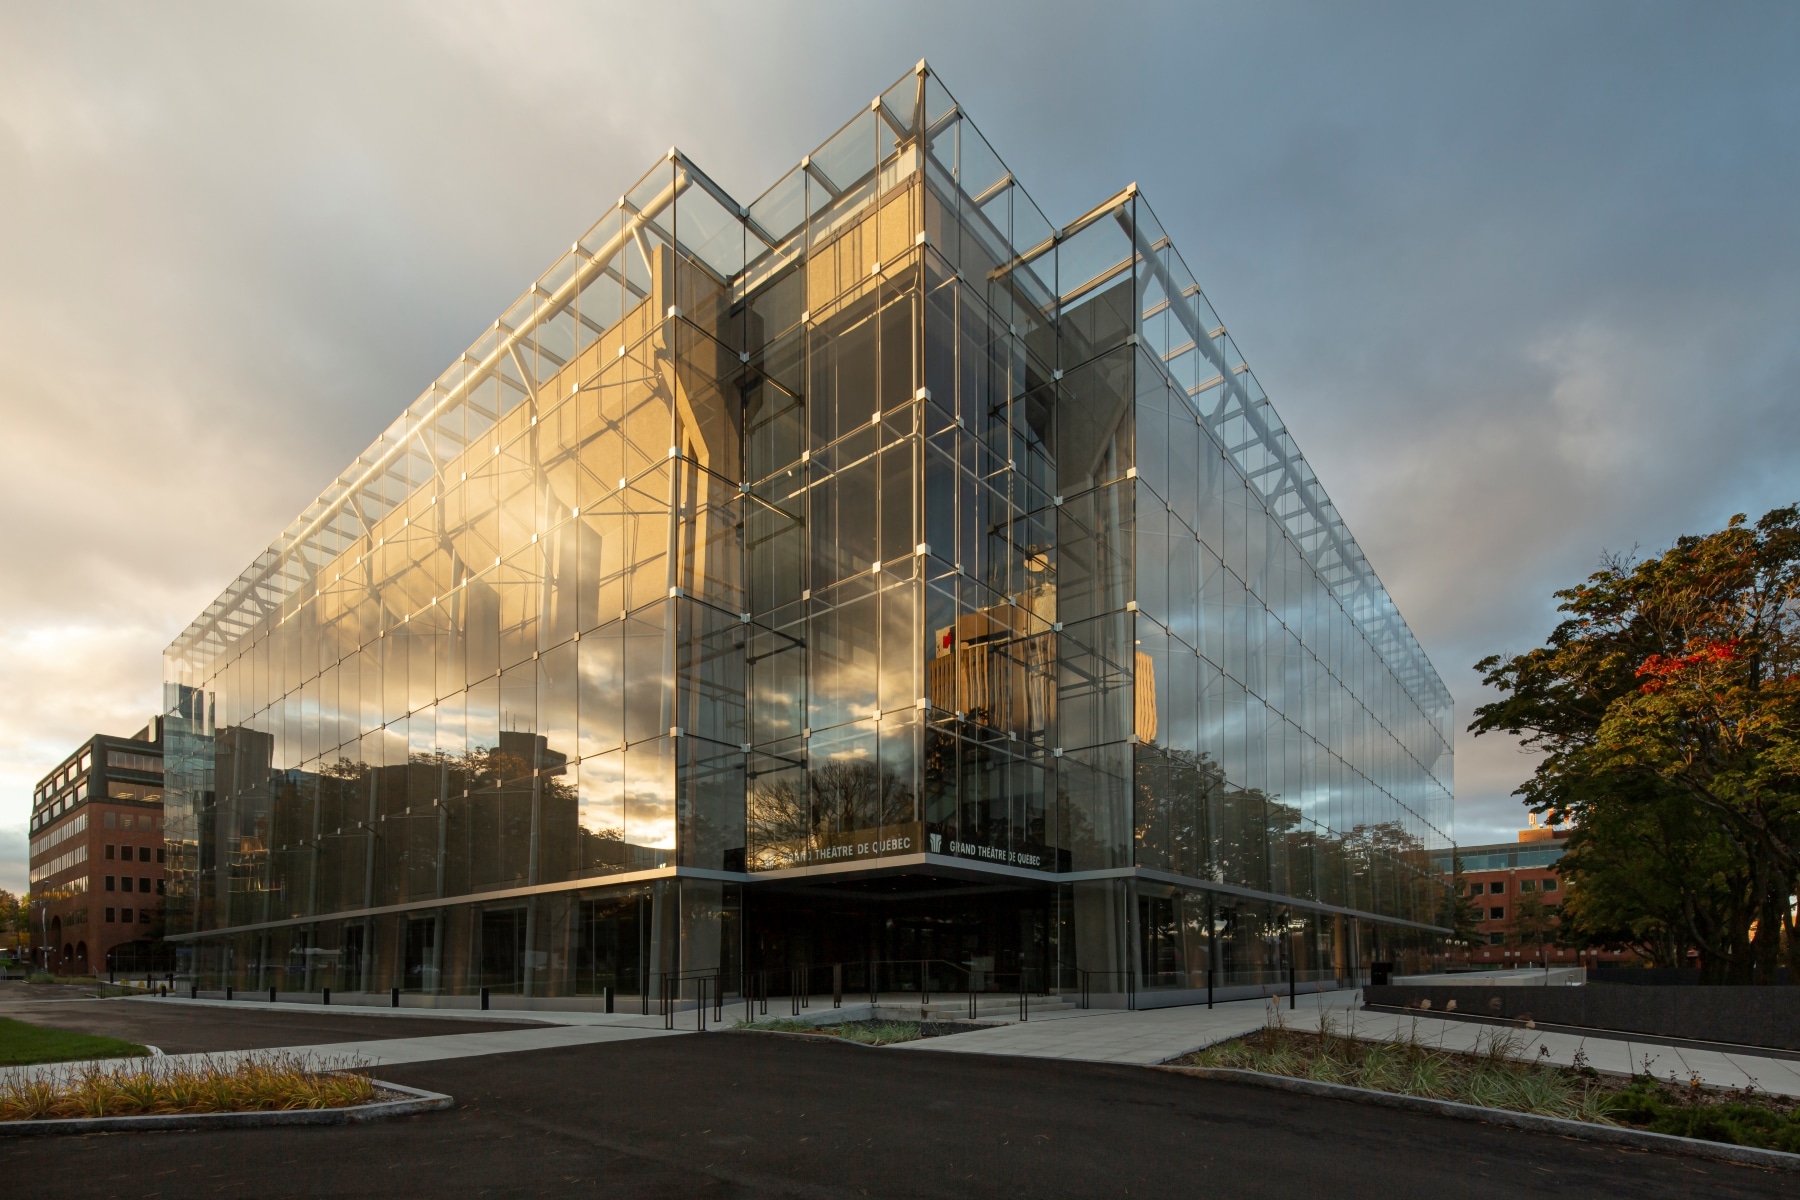 Grand Theatre Quebec-Lemay-Atelier-21-Architecture-Conservation-Credit StephaneGroleau-corner facade glass wall structure-07